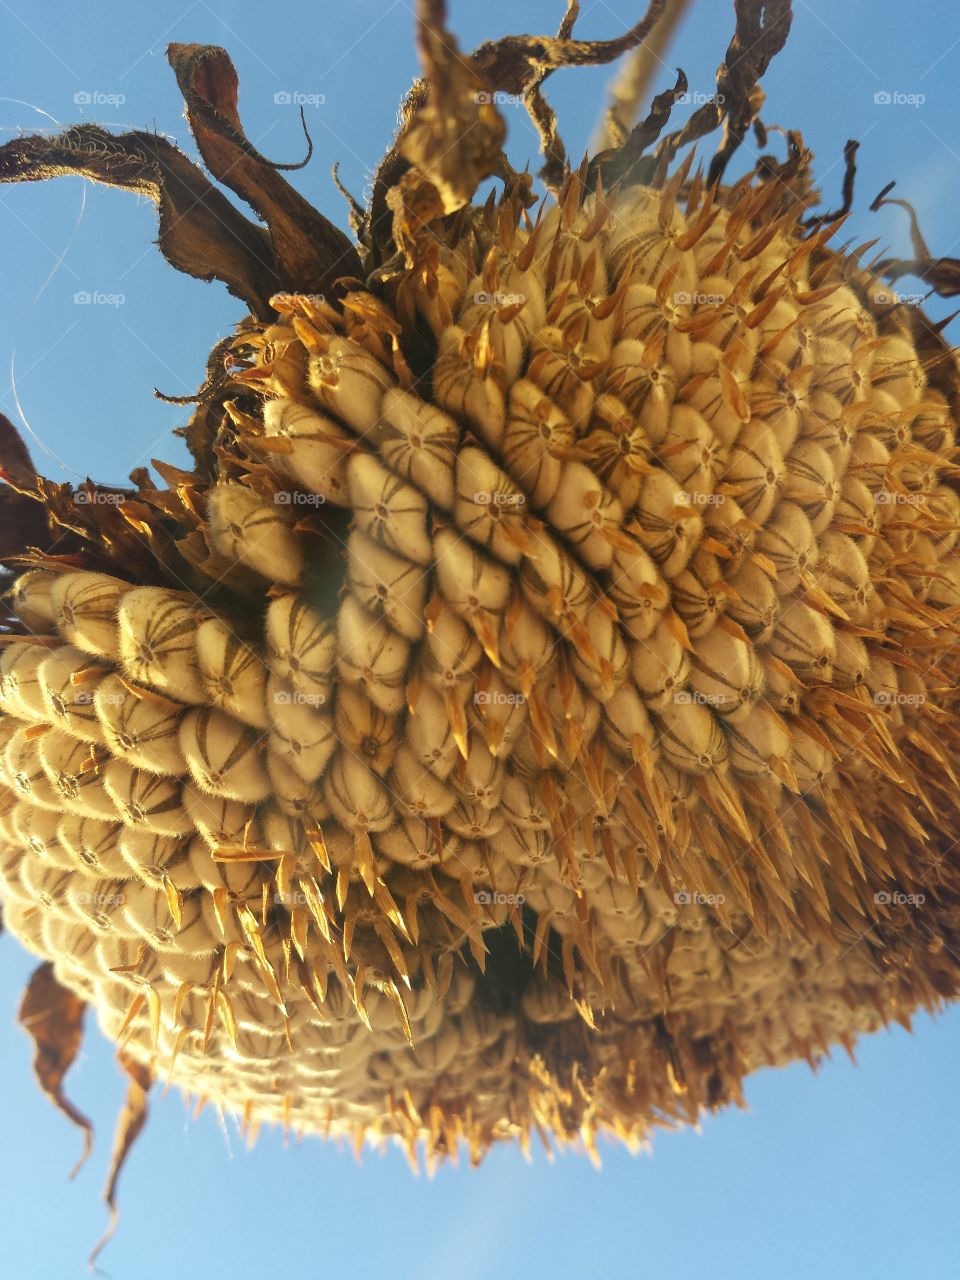 Extreme close-up of dry flower